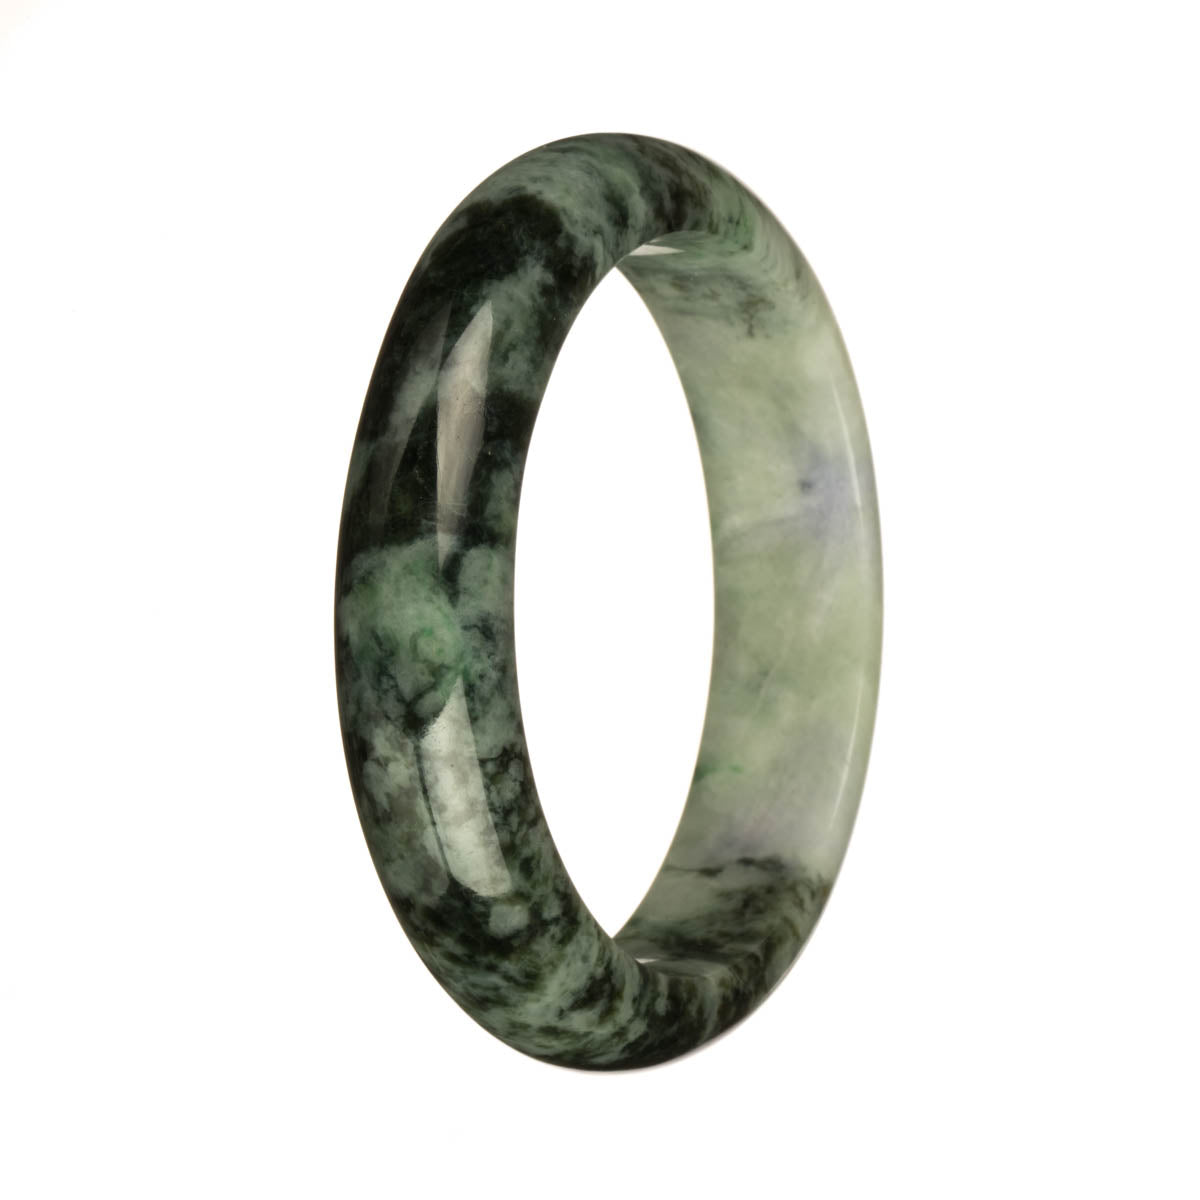 56.6mm Pale Green with Lavender and Dark Green Patterns and Apple Green Spots Jade Bangle Bracelet